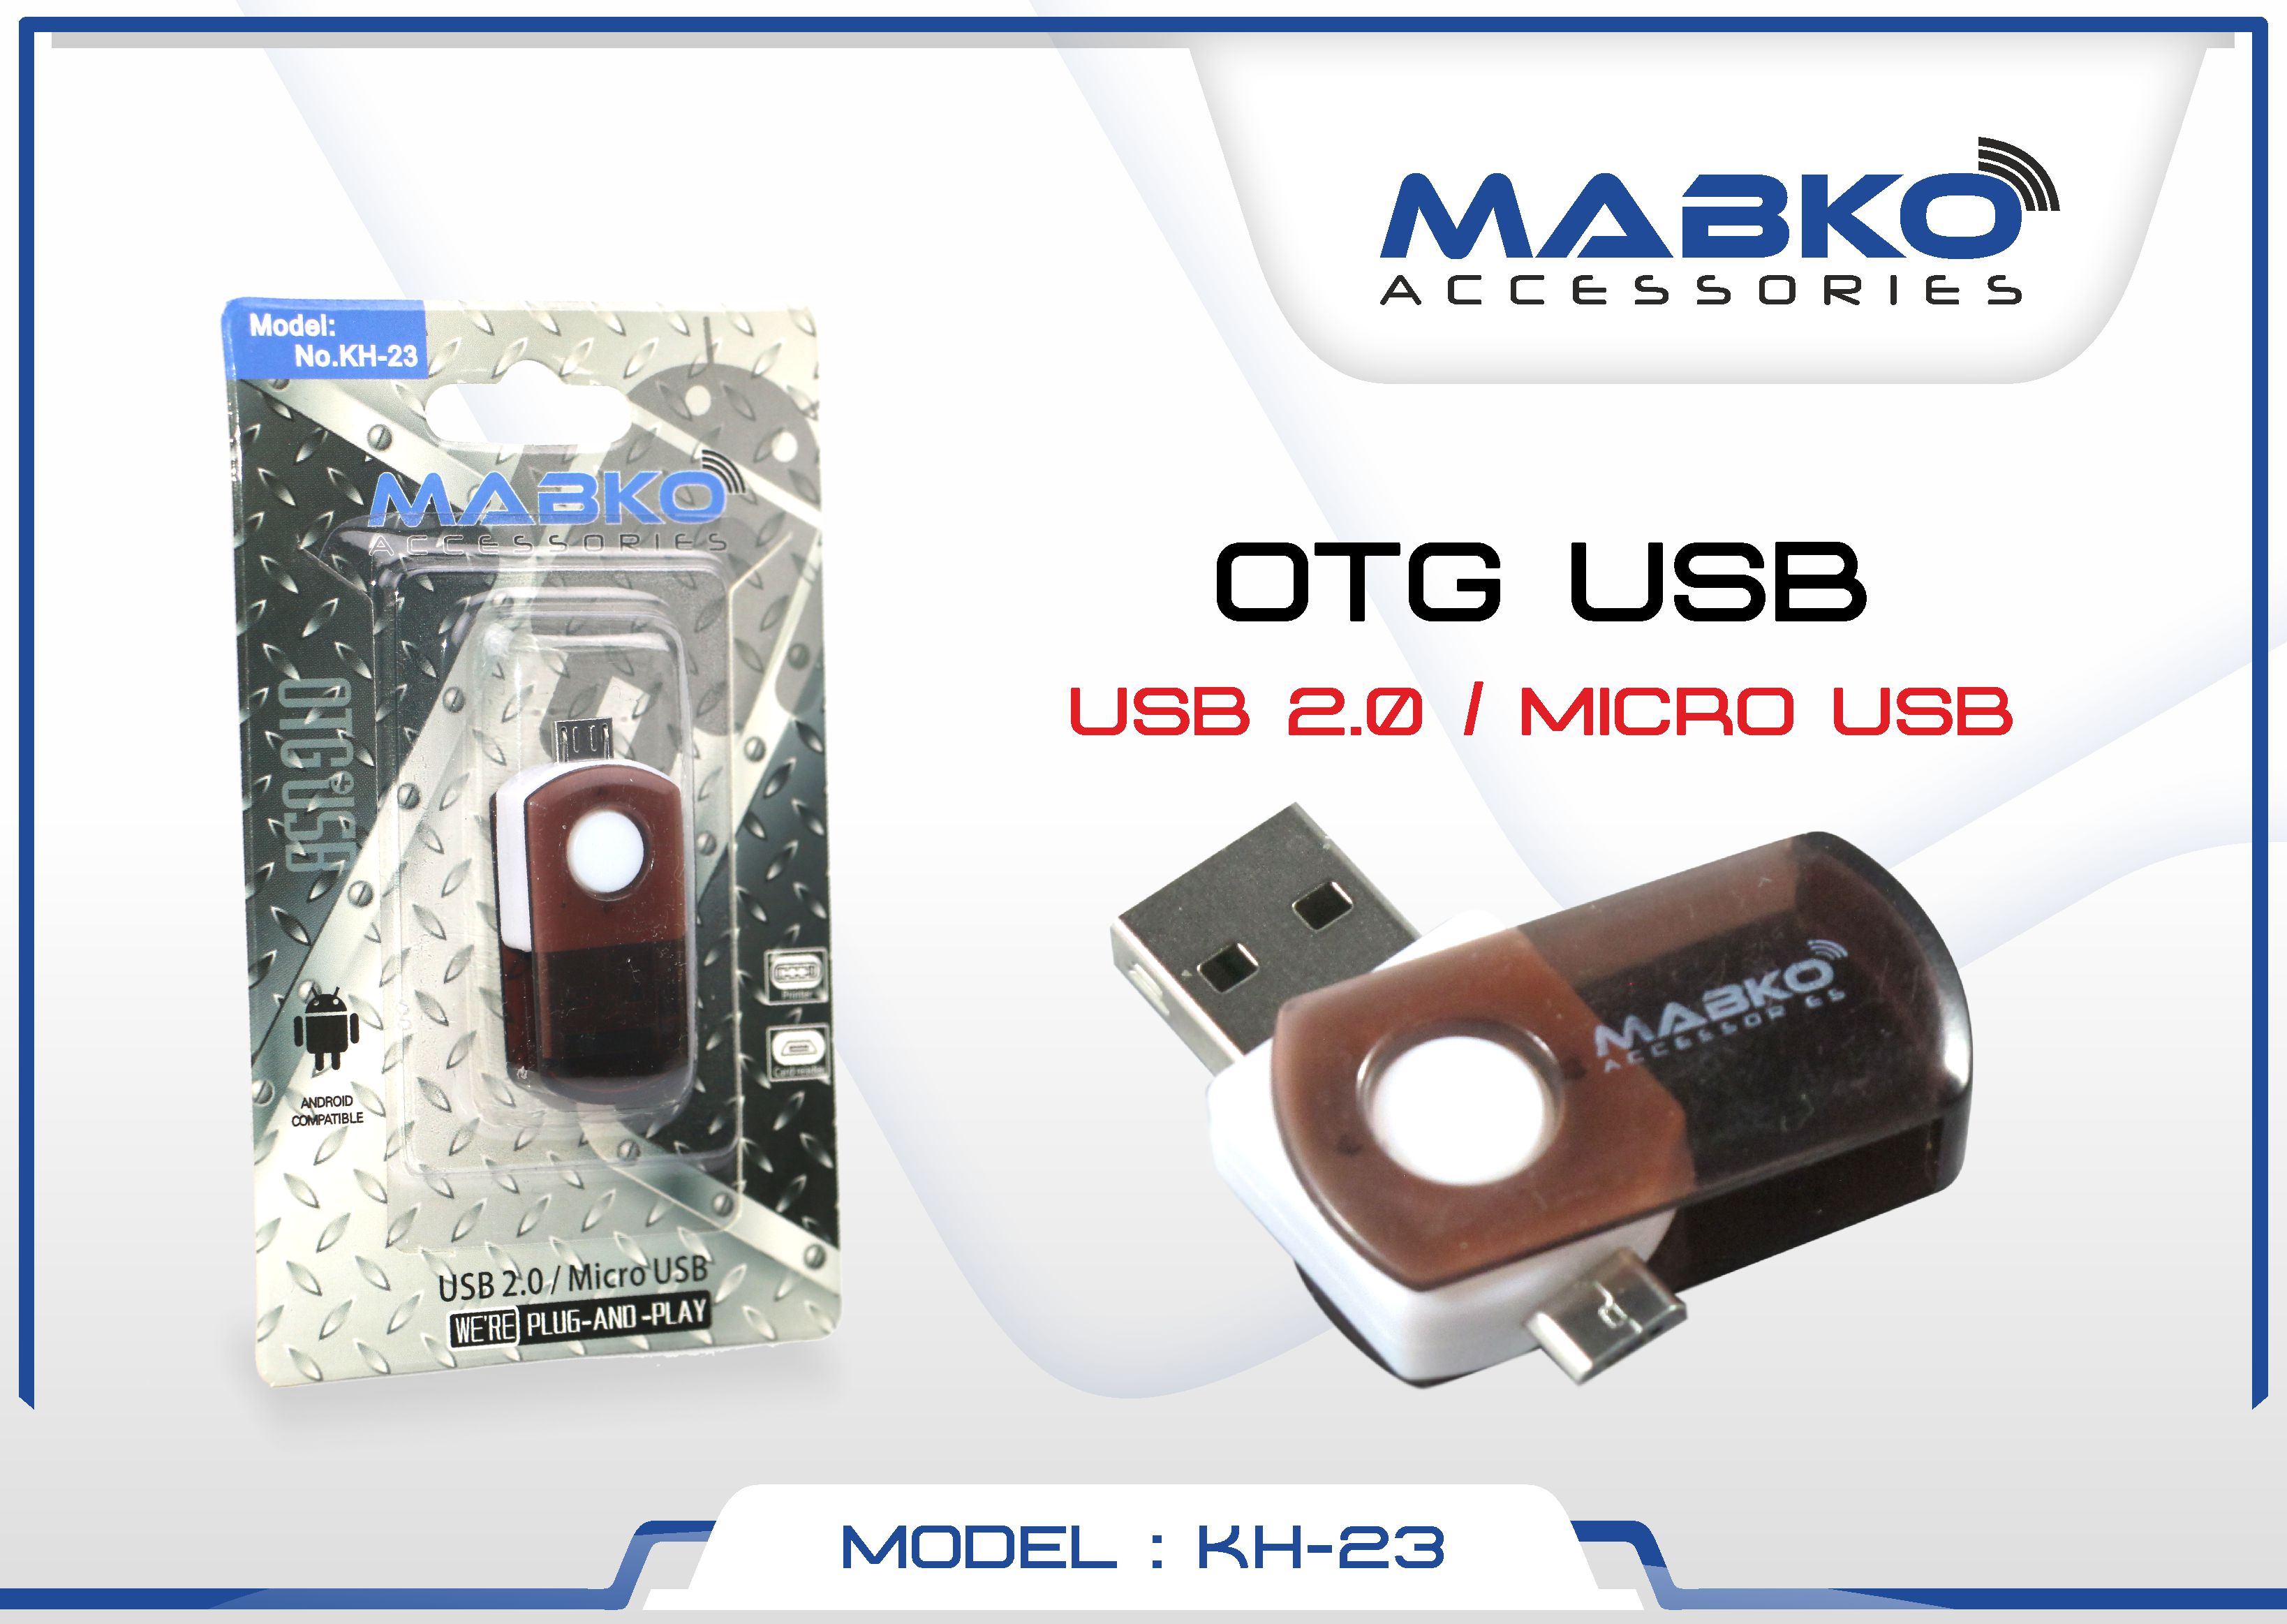 MABKO CABLE KH-C43